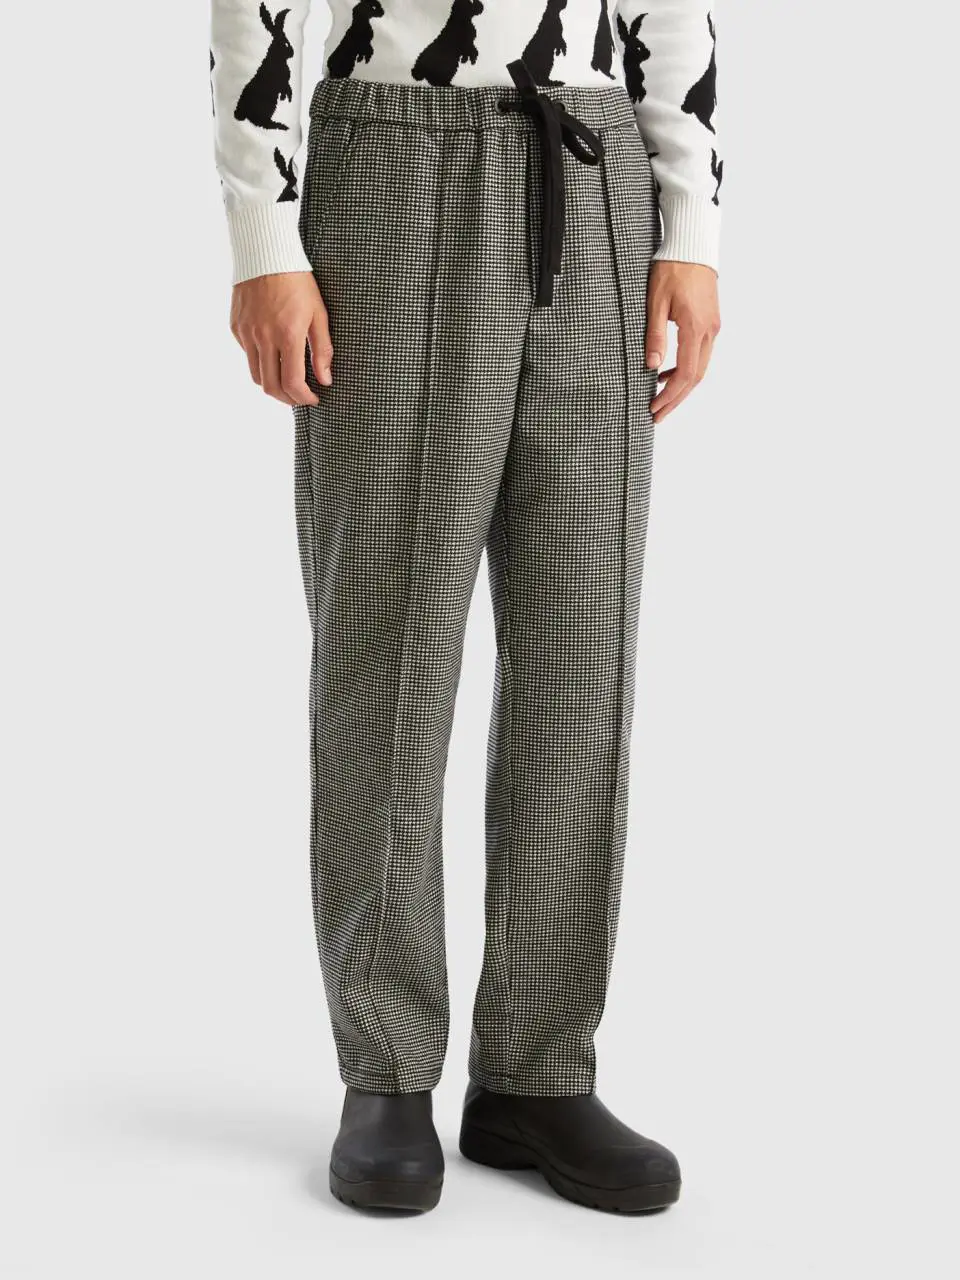 Benetton houndstooth joggers. 1